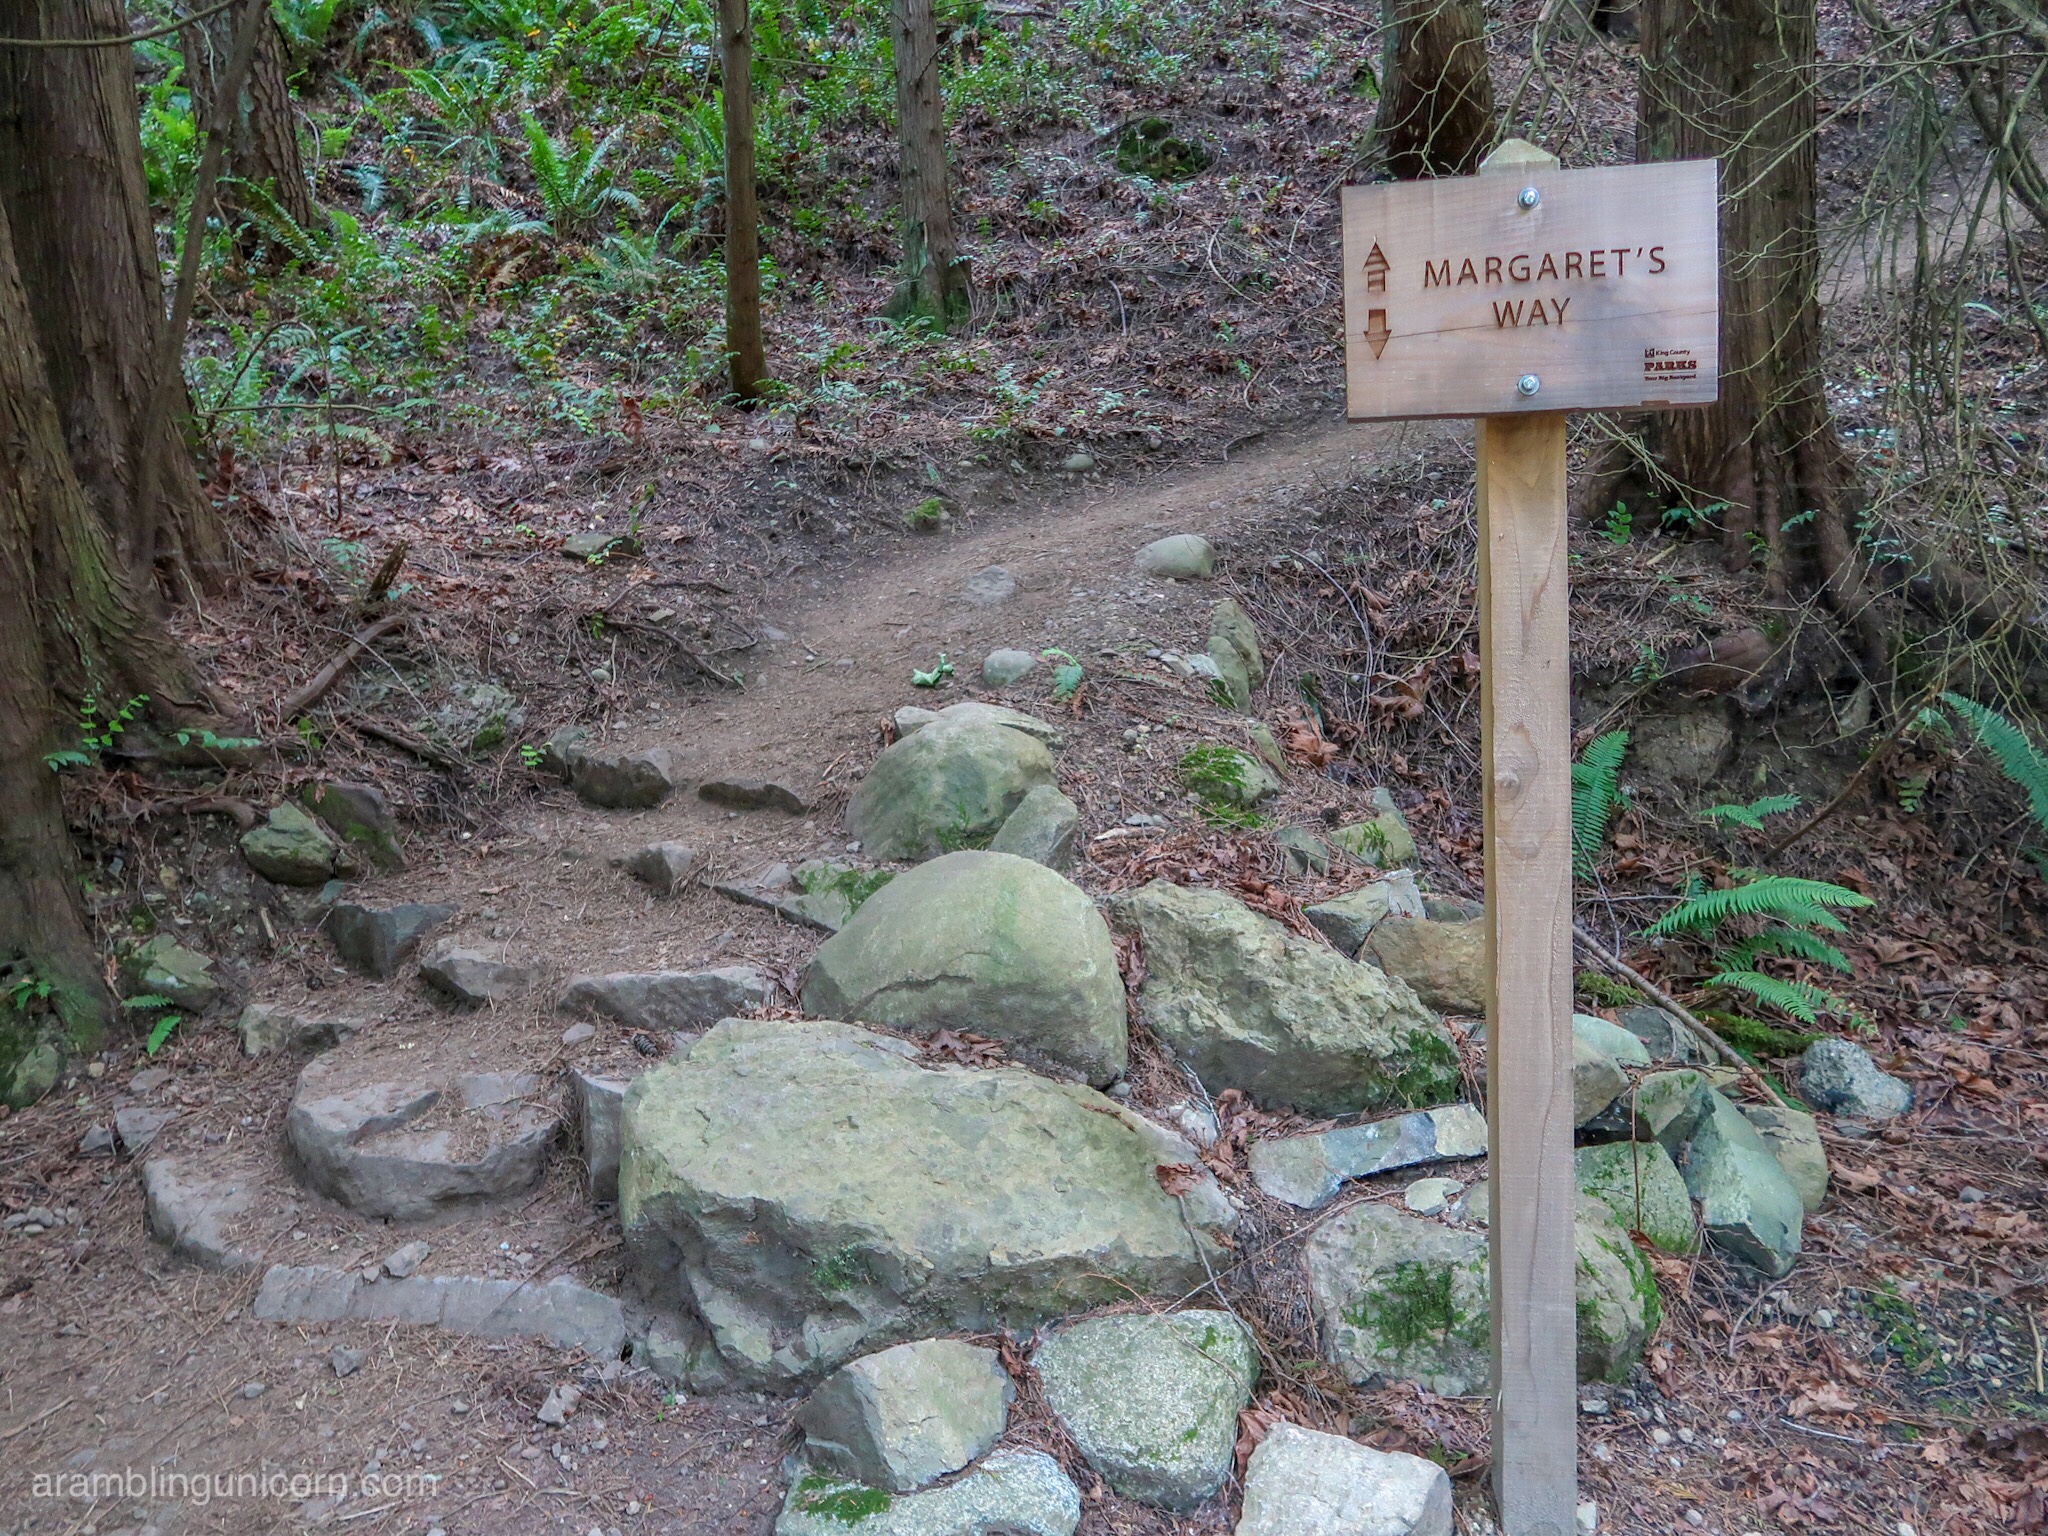 One of the 18 trail signs along Margaret’s Way